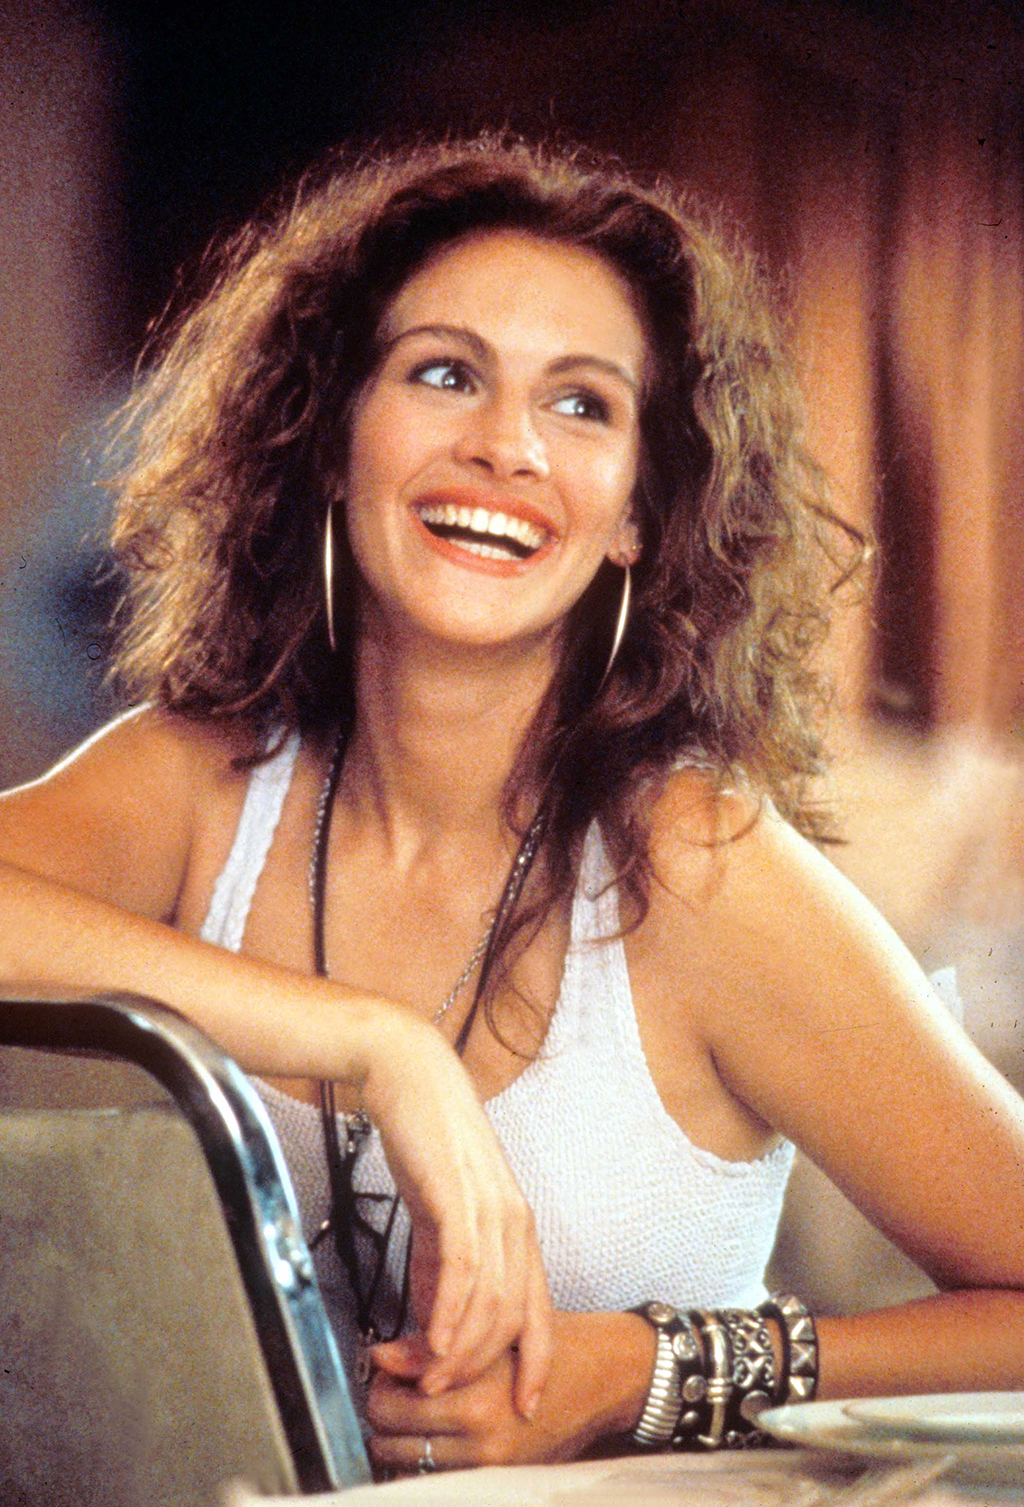 Pretty Woman: How Julia Roberts and Richard Gere have changed in